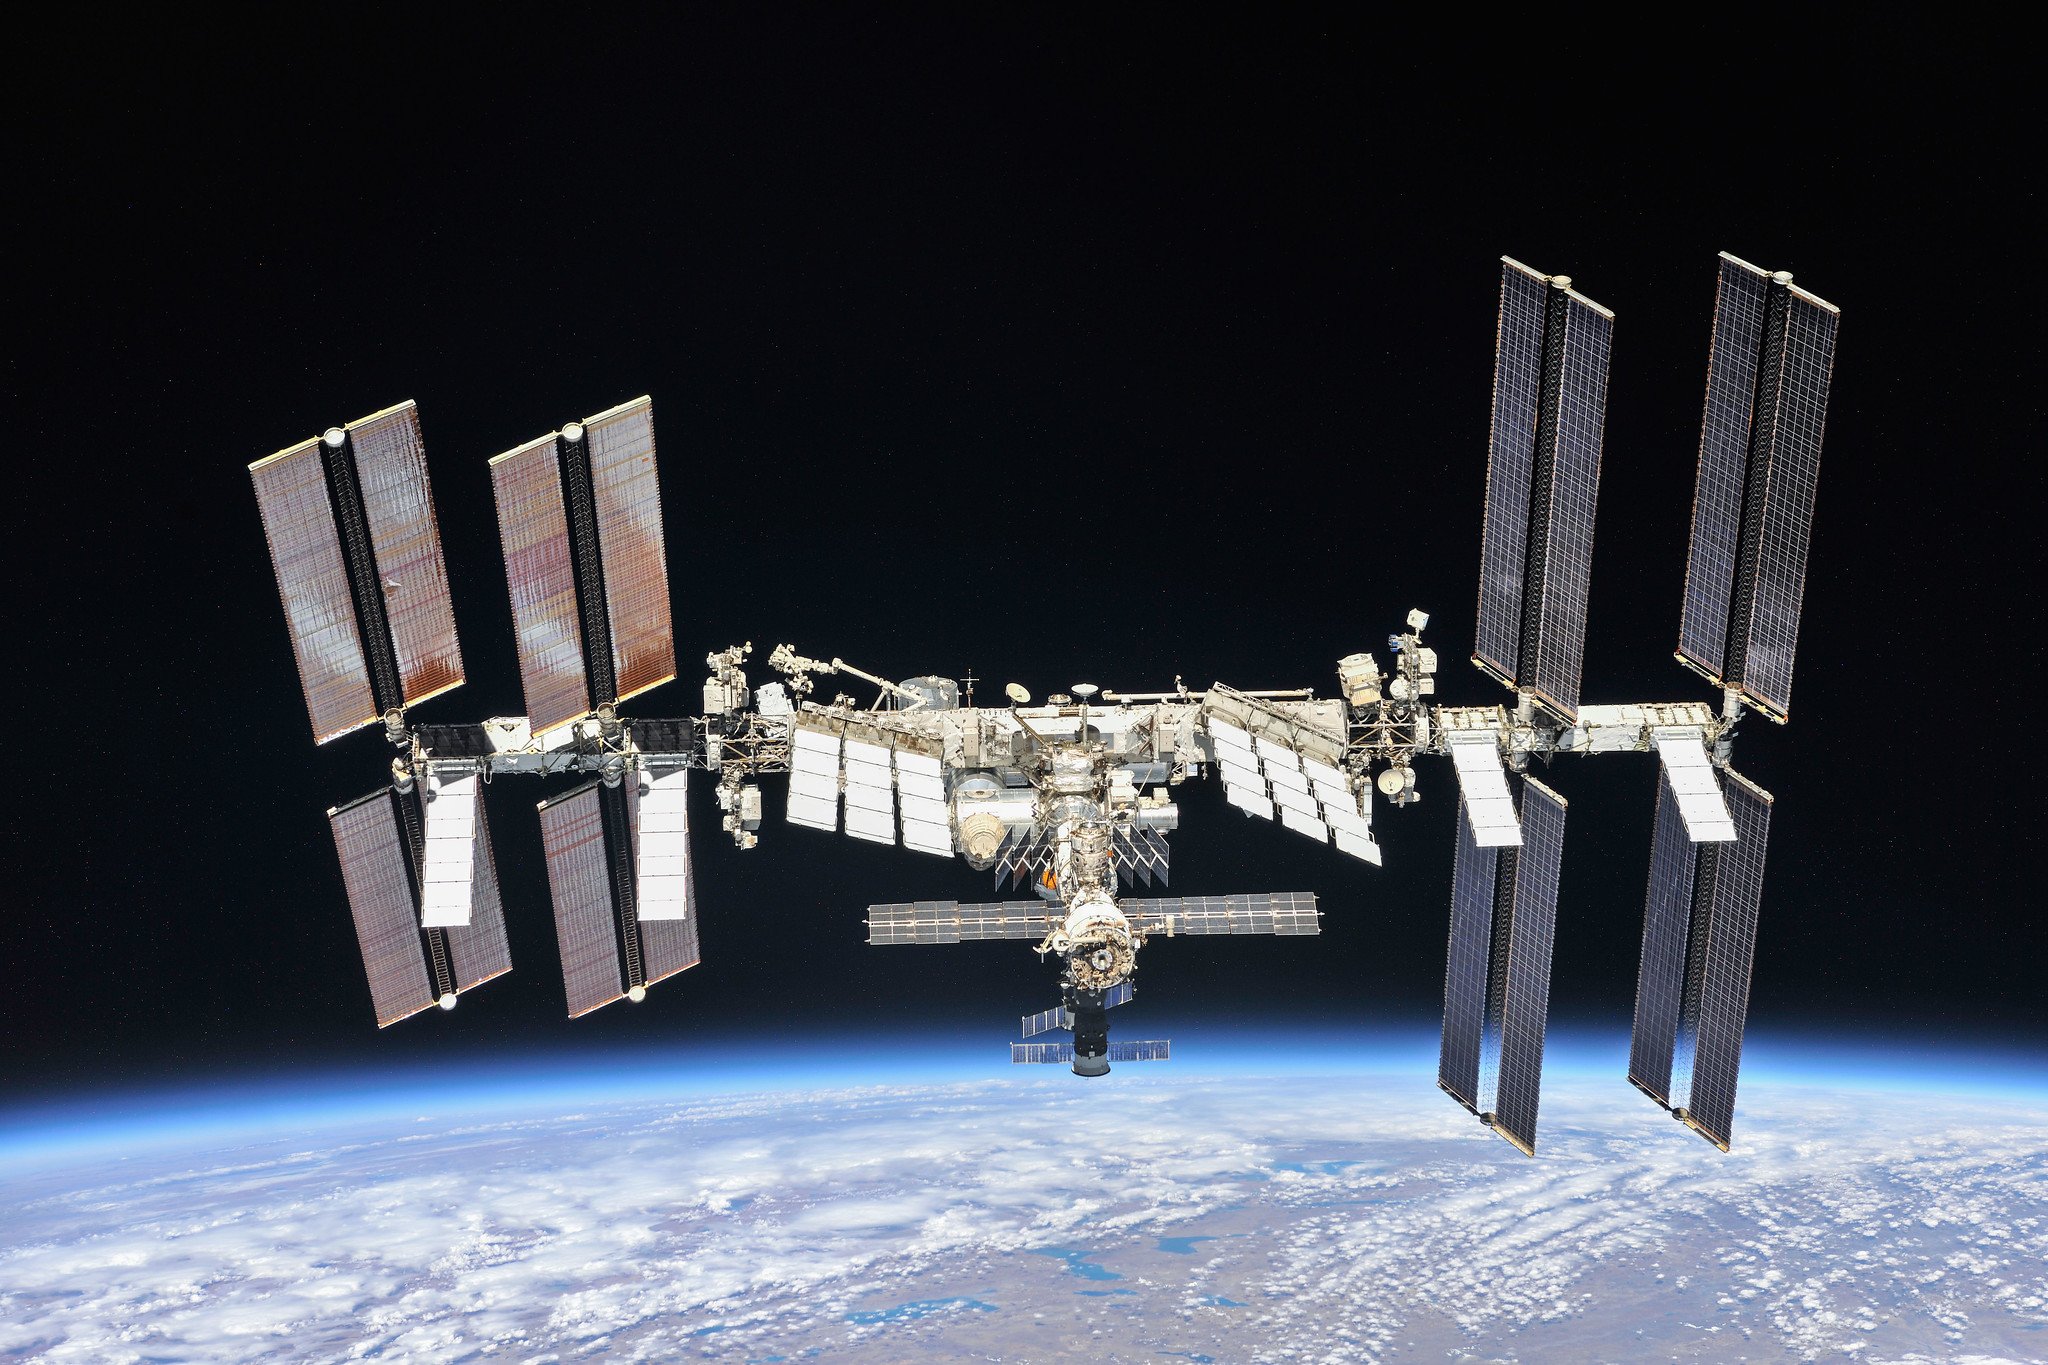 The International Space Station as photographed by astronauts aboard a Soyuz spacecraft. It hangs above the Earth in the image.